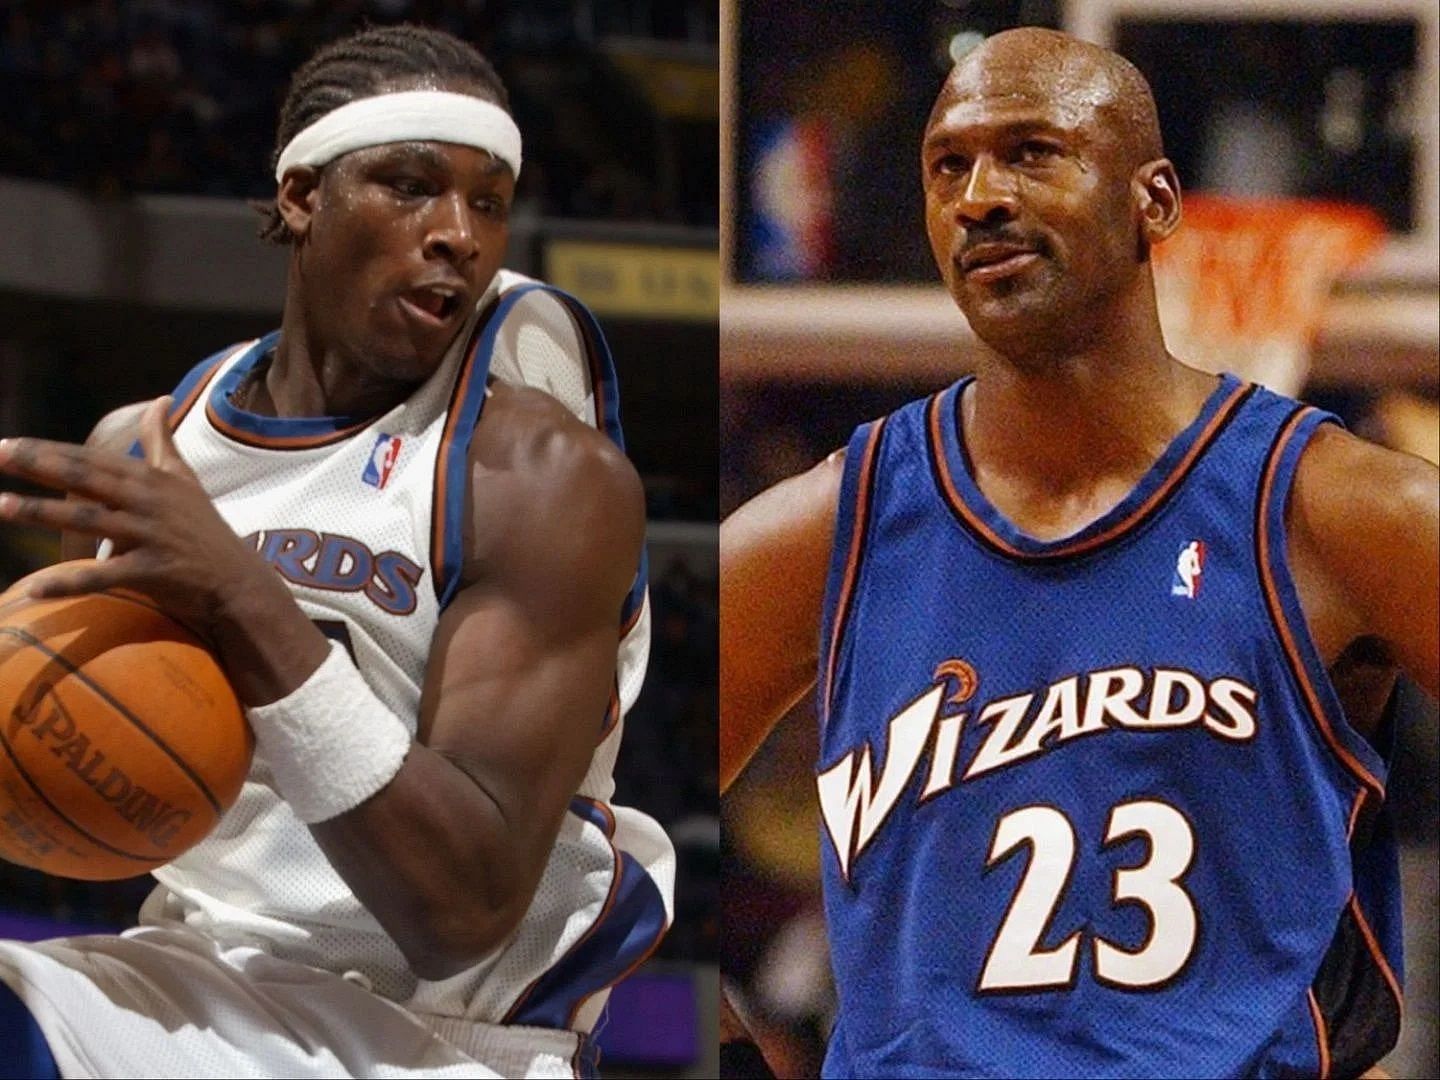 Kwame Brown (L) said he beat Michael Jordan (R) in a one-on-one game.